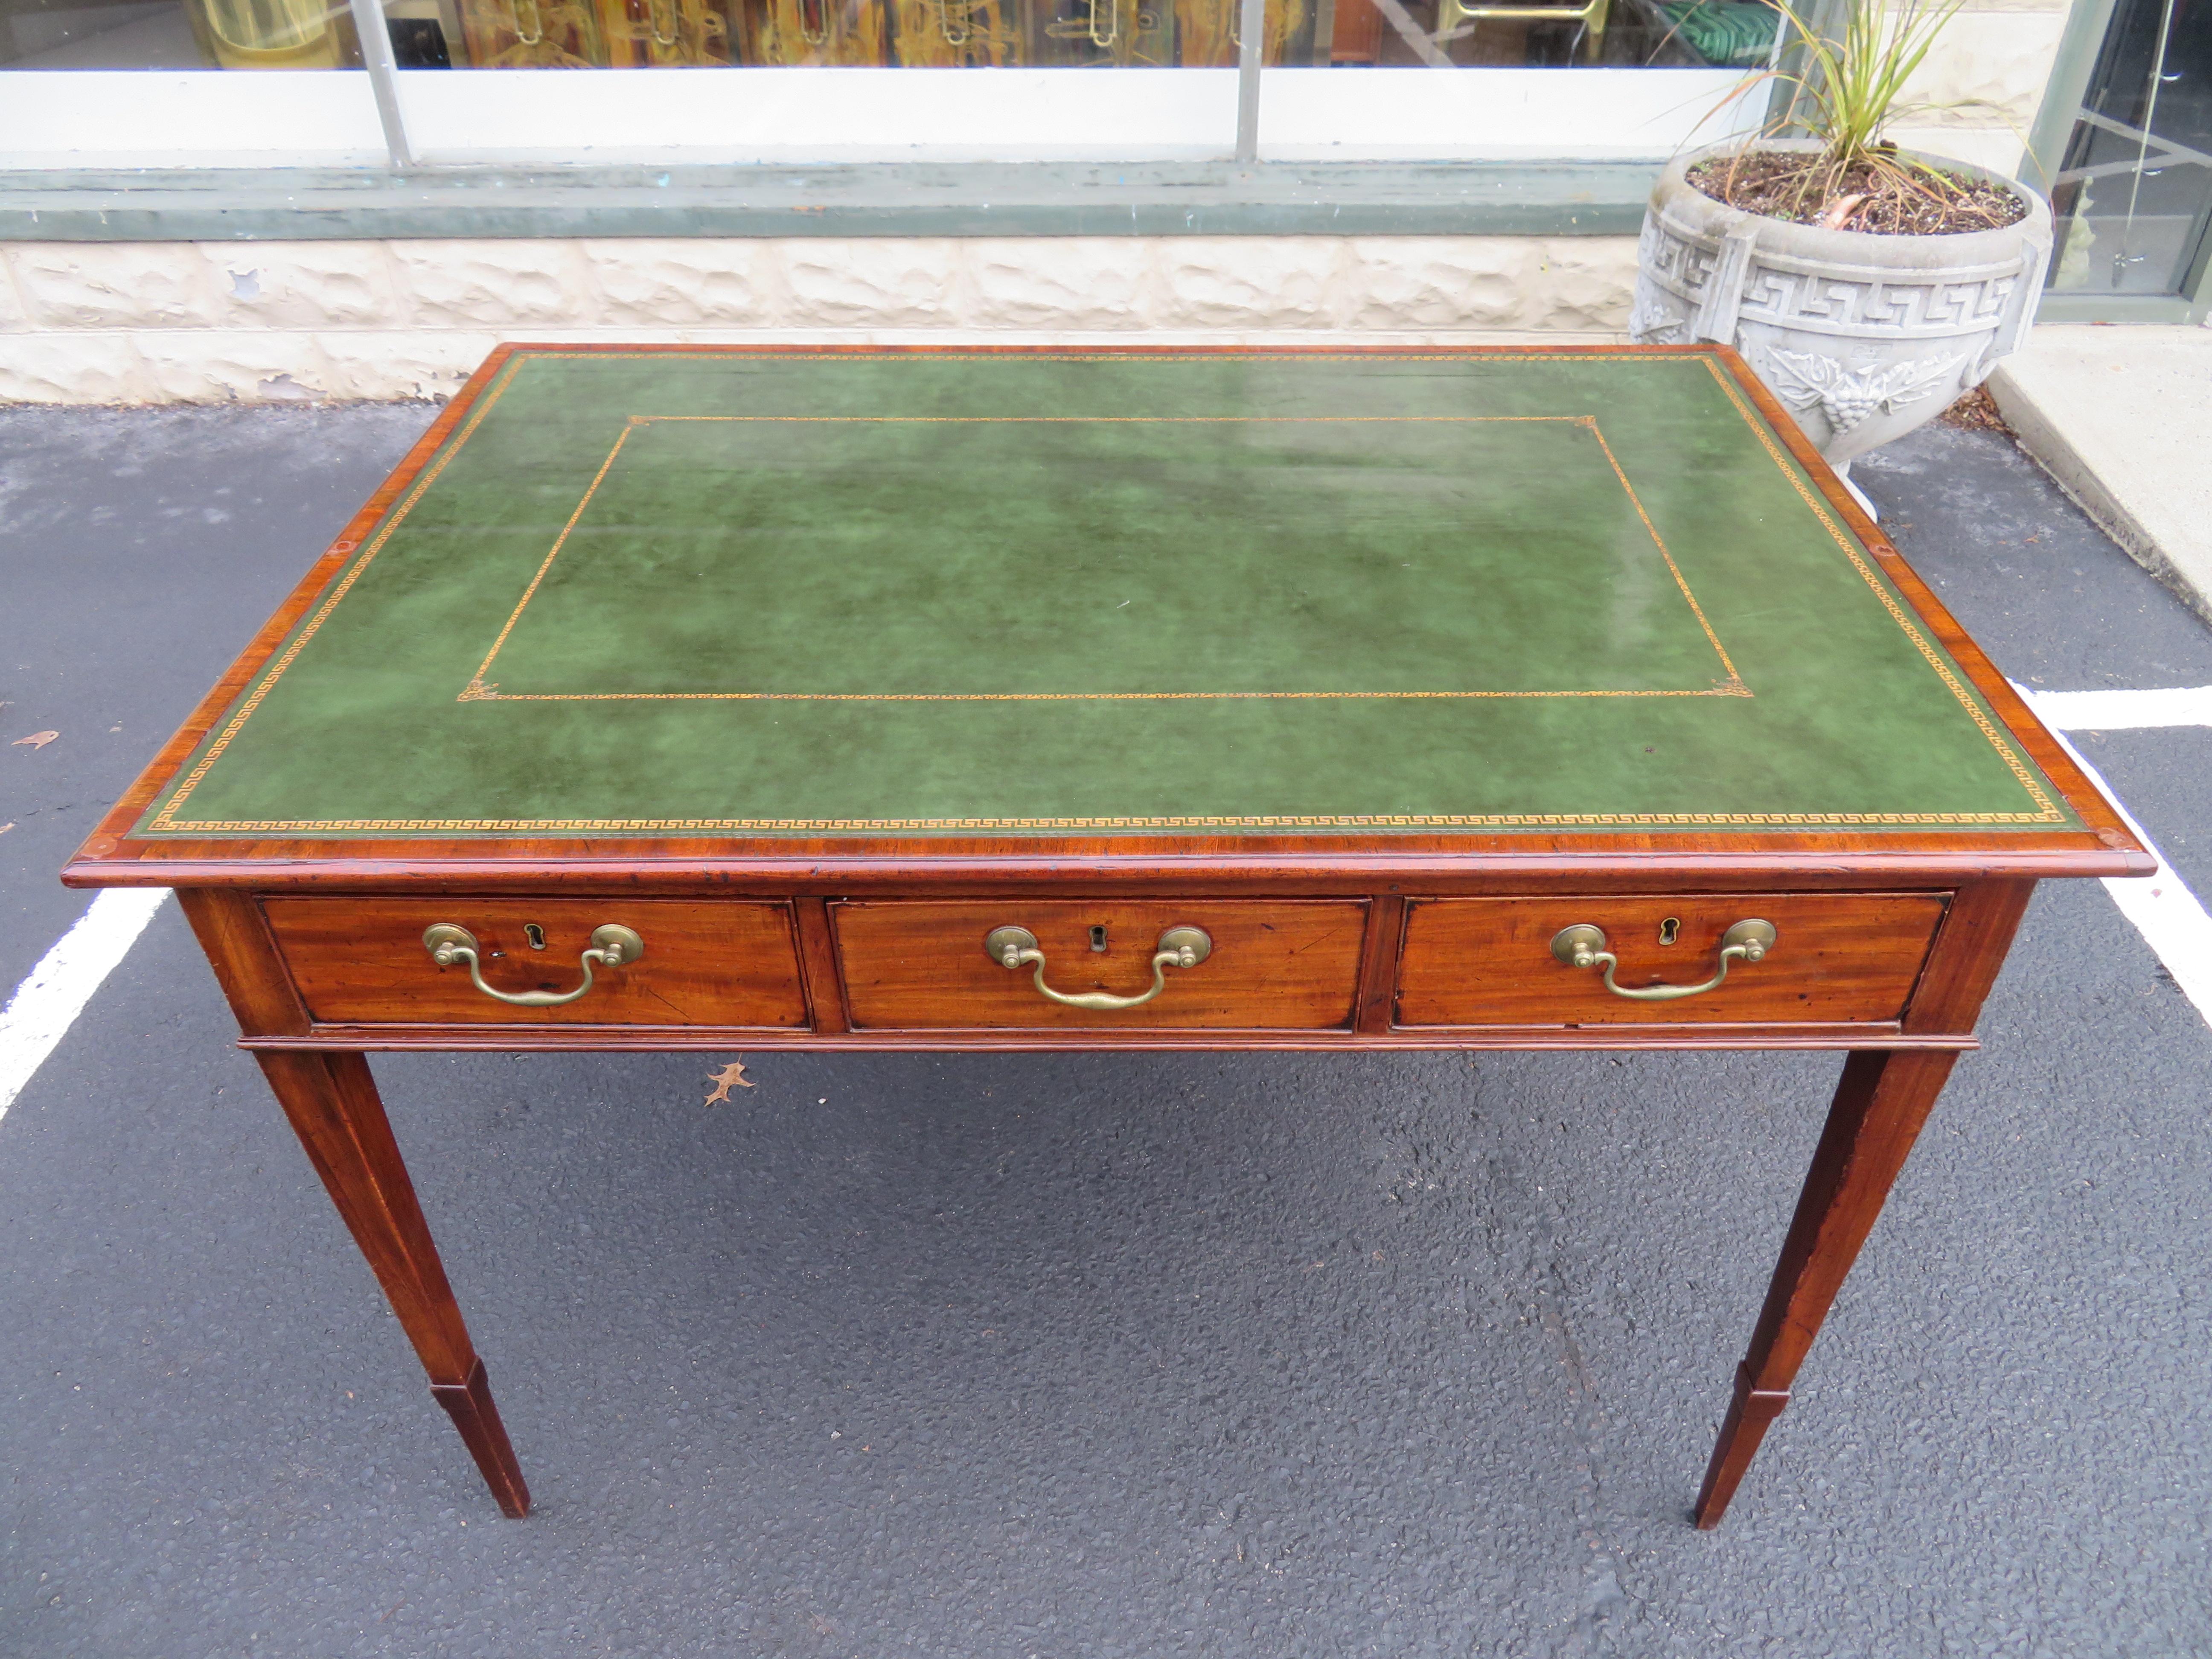 Antique George III leather and mahogany double sided partner writing table desk. We love the original tooled green and gold inlayed leather top against the nicely aged patina of the mahogany wood-very charming in-deed! A very attractive writing desk